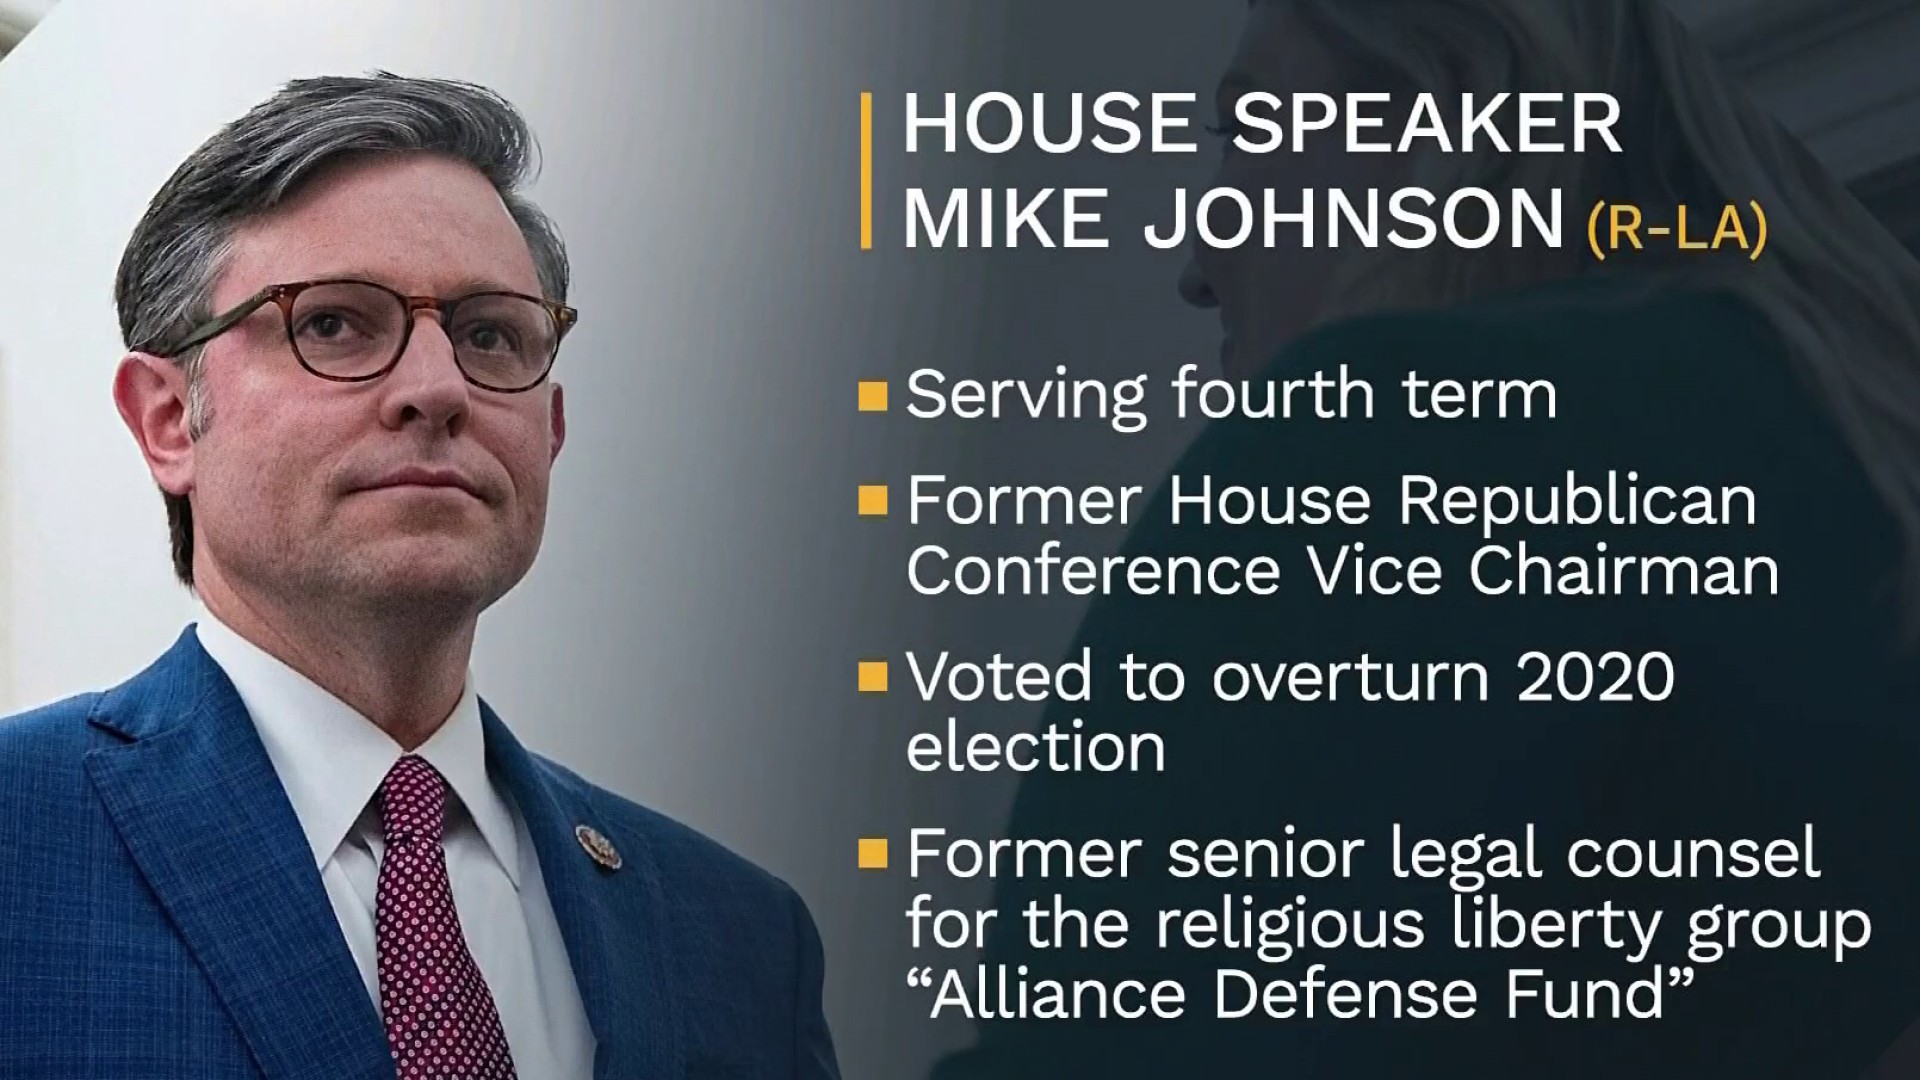 What to know about new House Speaker Mike Johnson